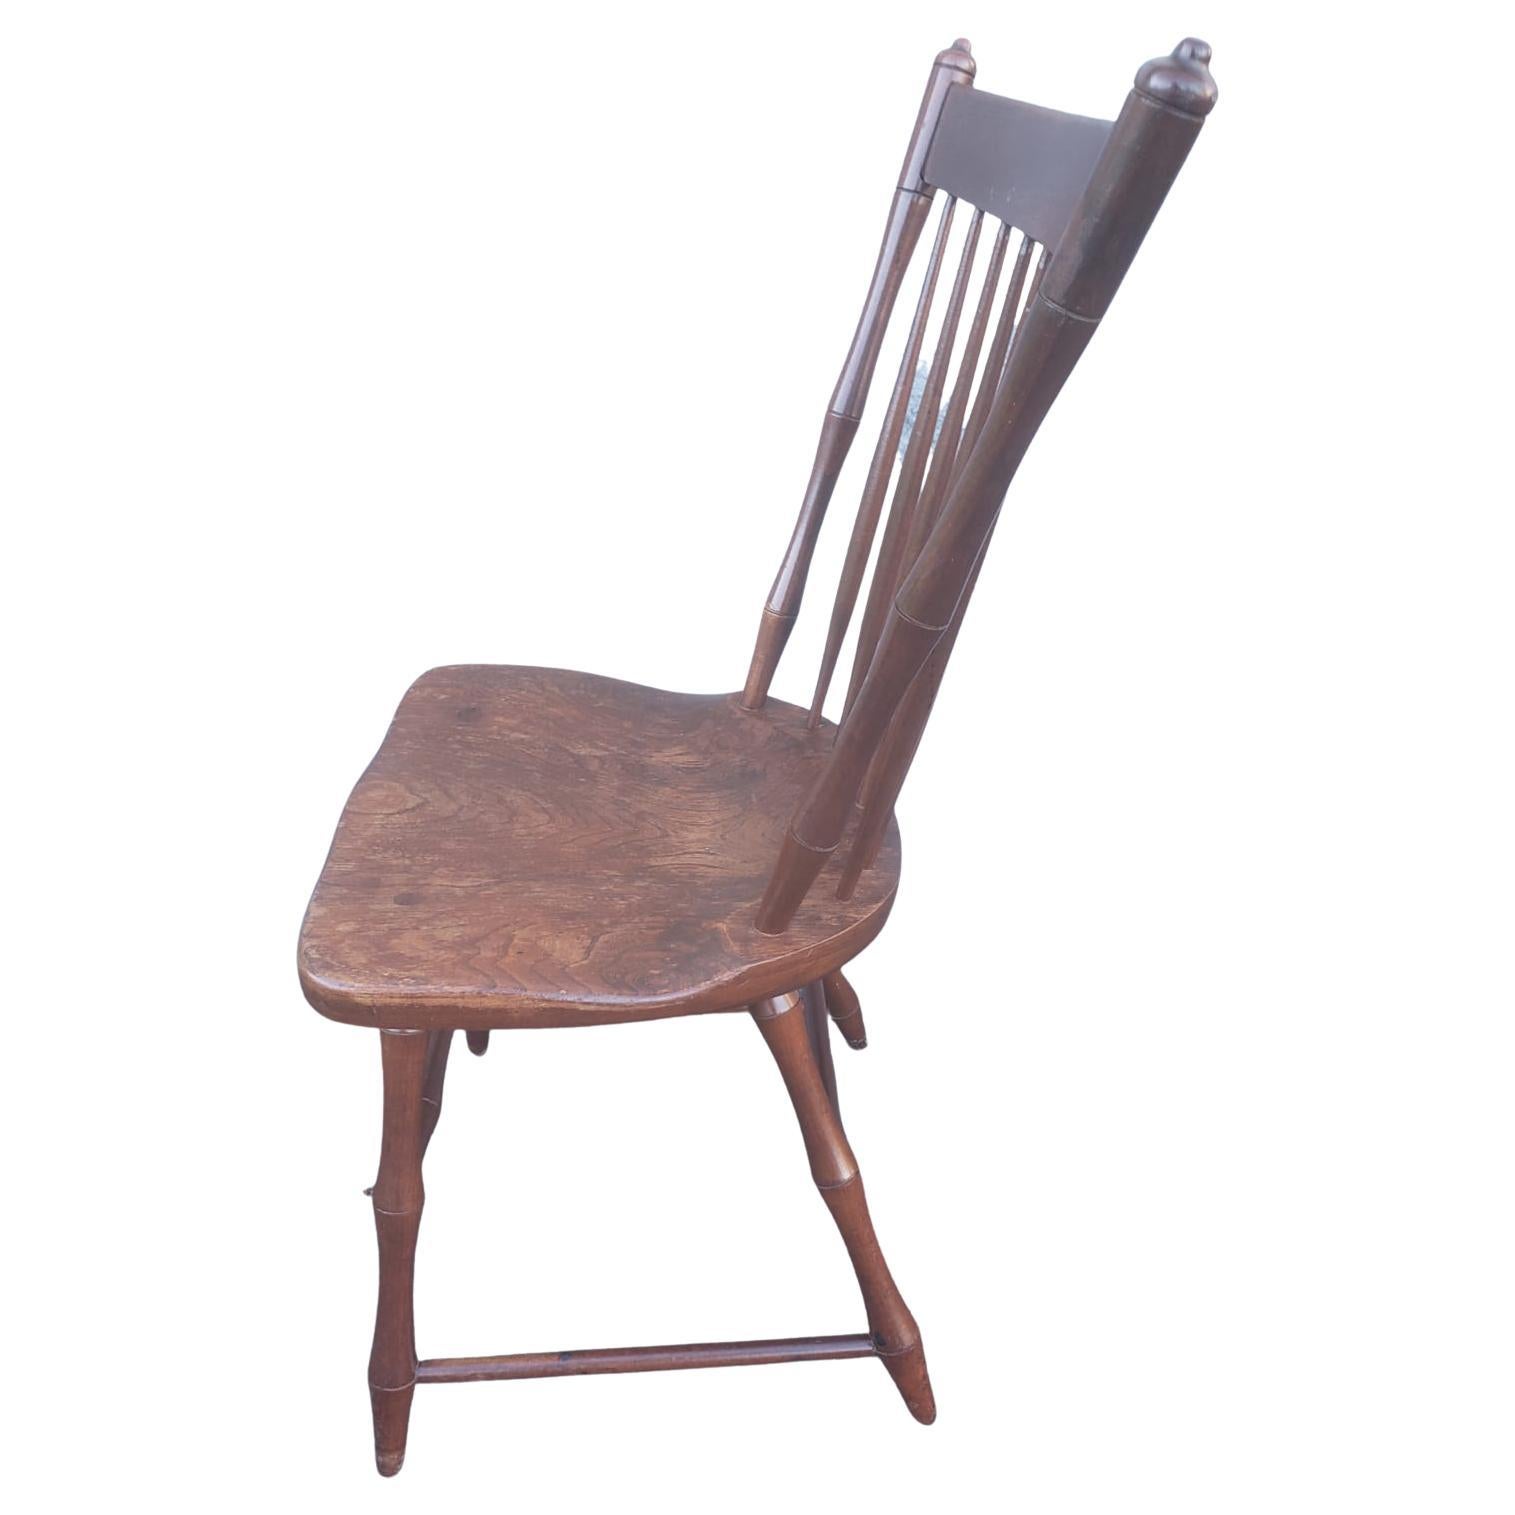 American Colonial Antique Faux Bamboo Cherry Windsor Chair by Harden, Circa 1800s